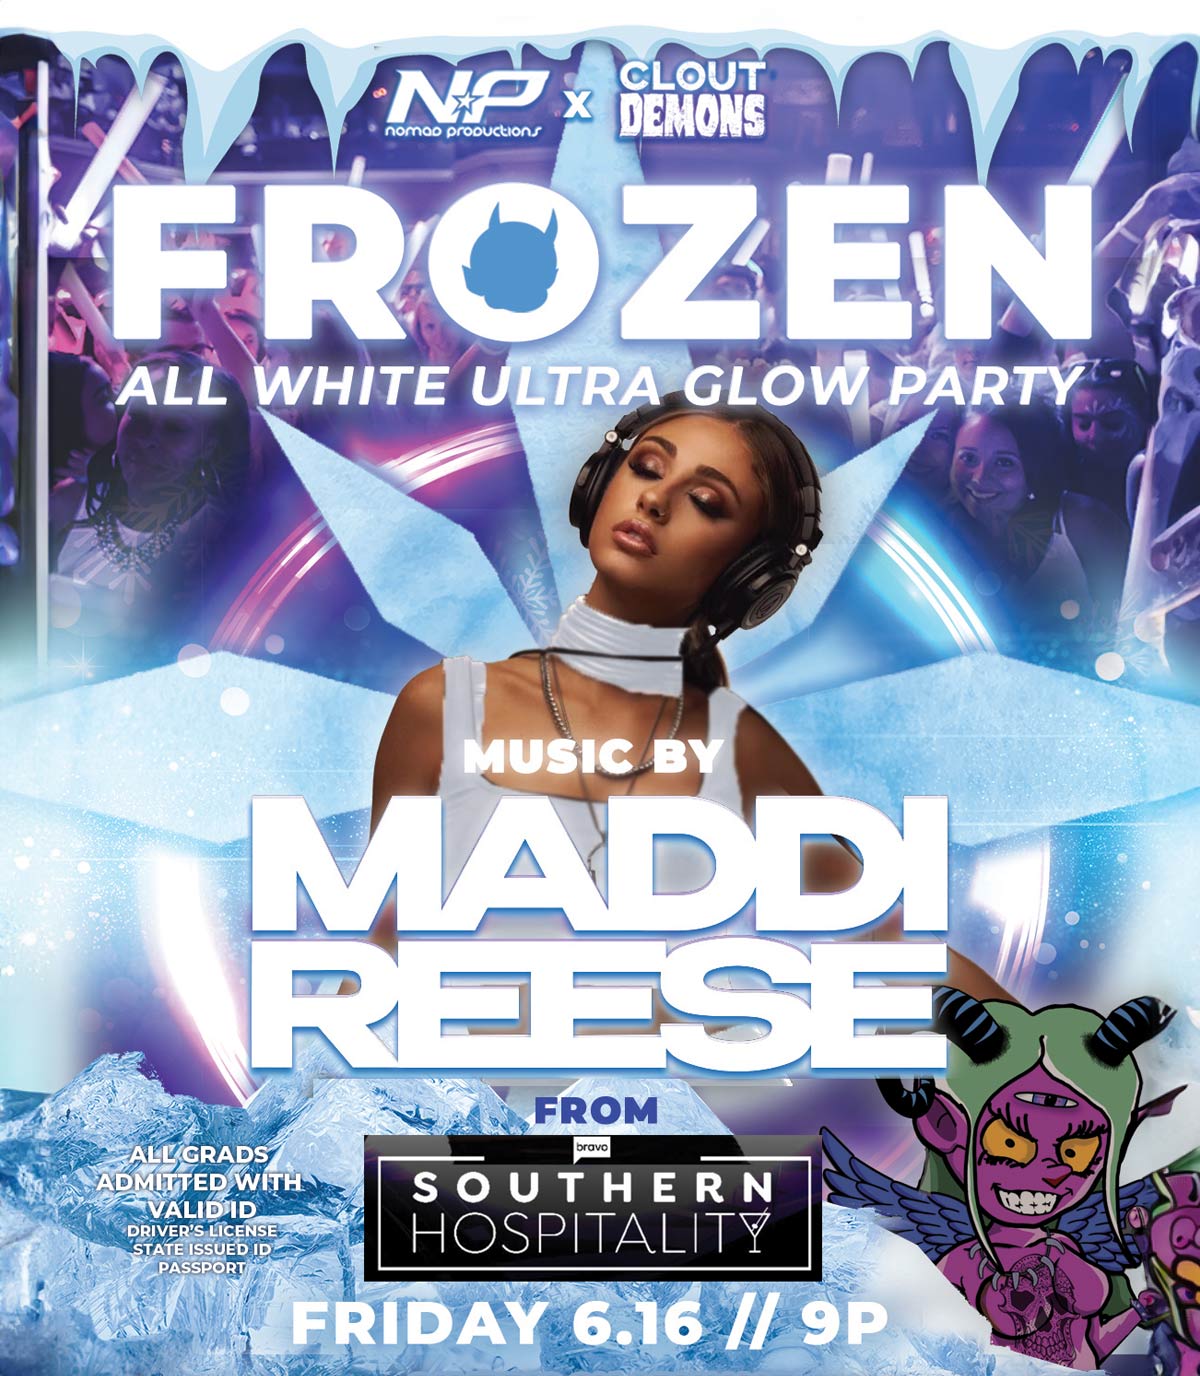 BC Nomad x Clout Demons Clothing present Frozen: All White Ultra Glow Party with Maddi Reese from Bravo's Southern Hospitality